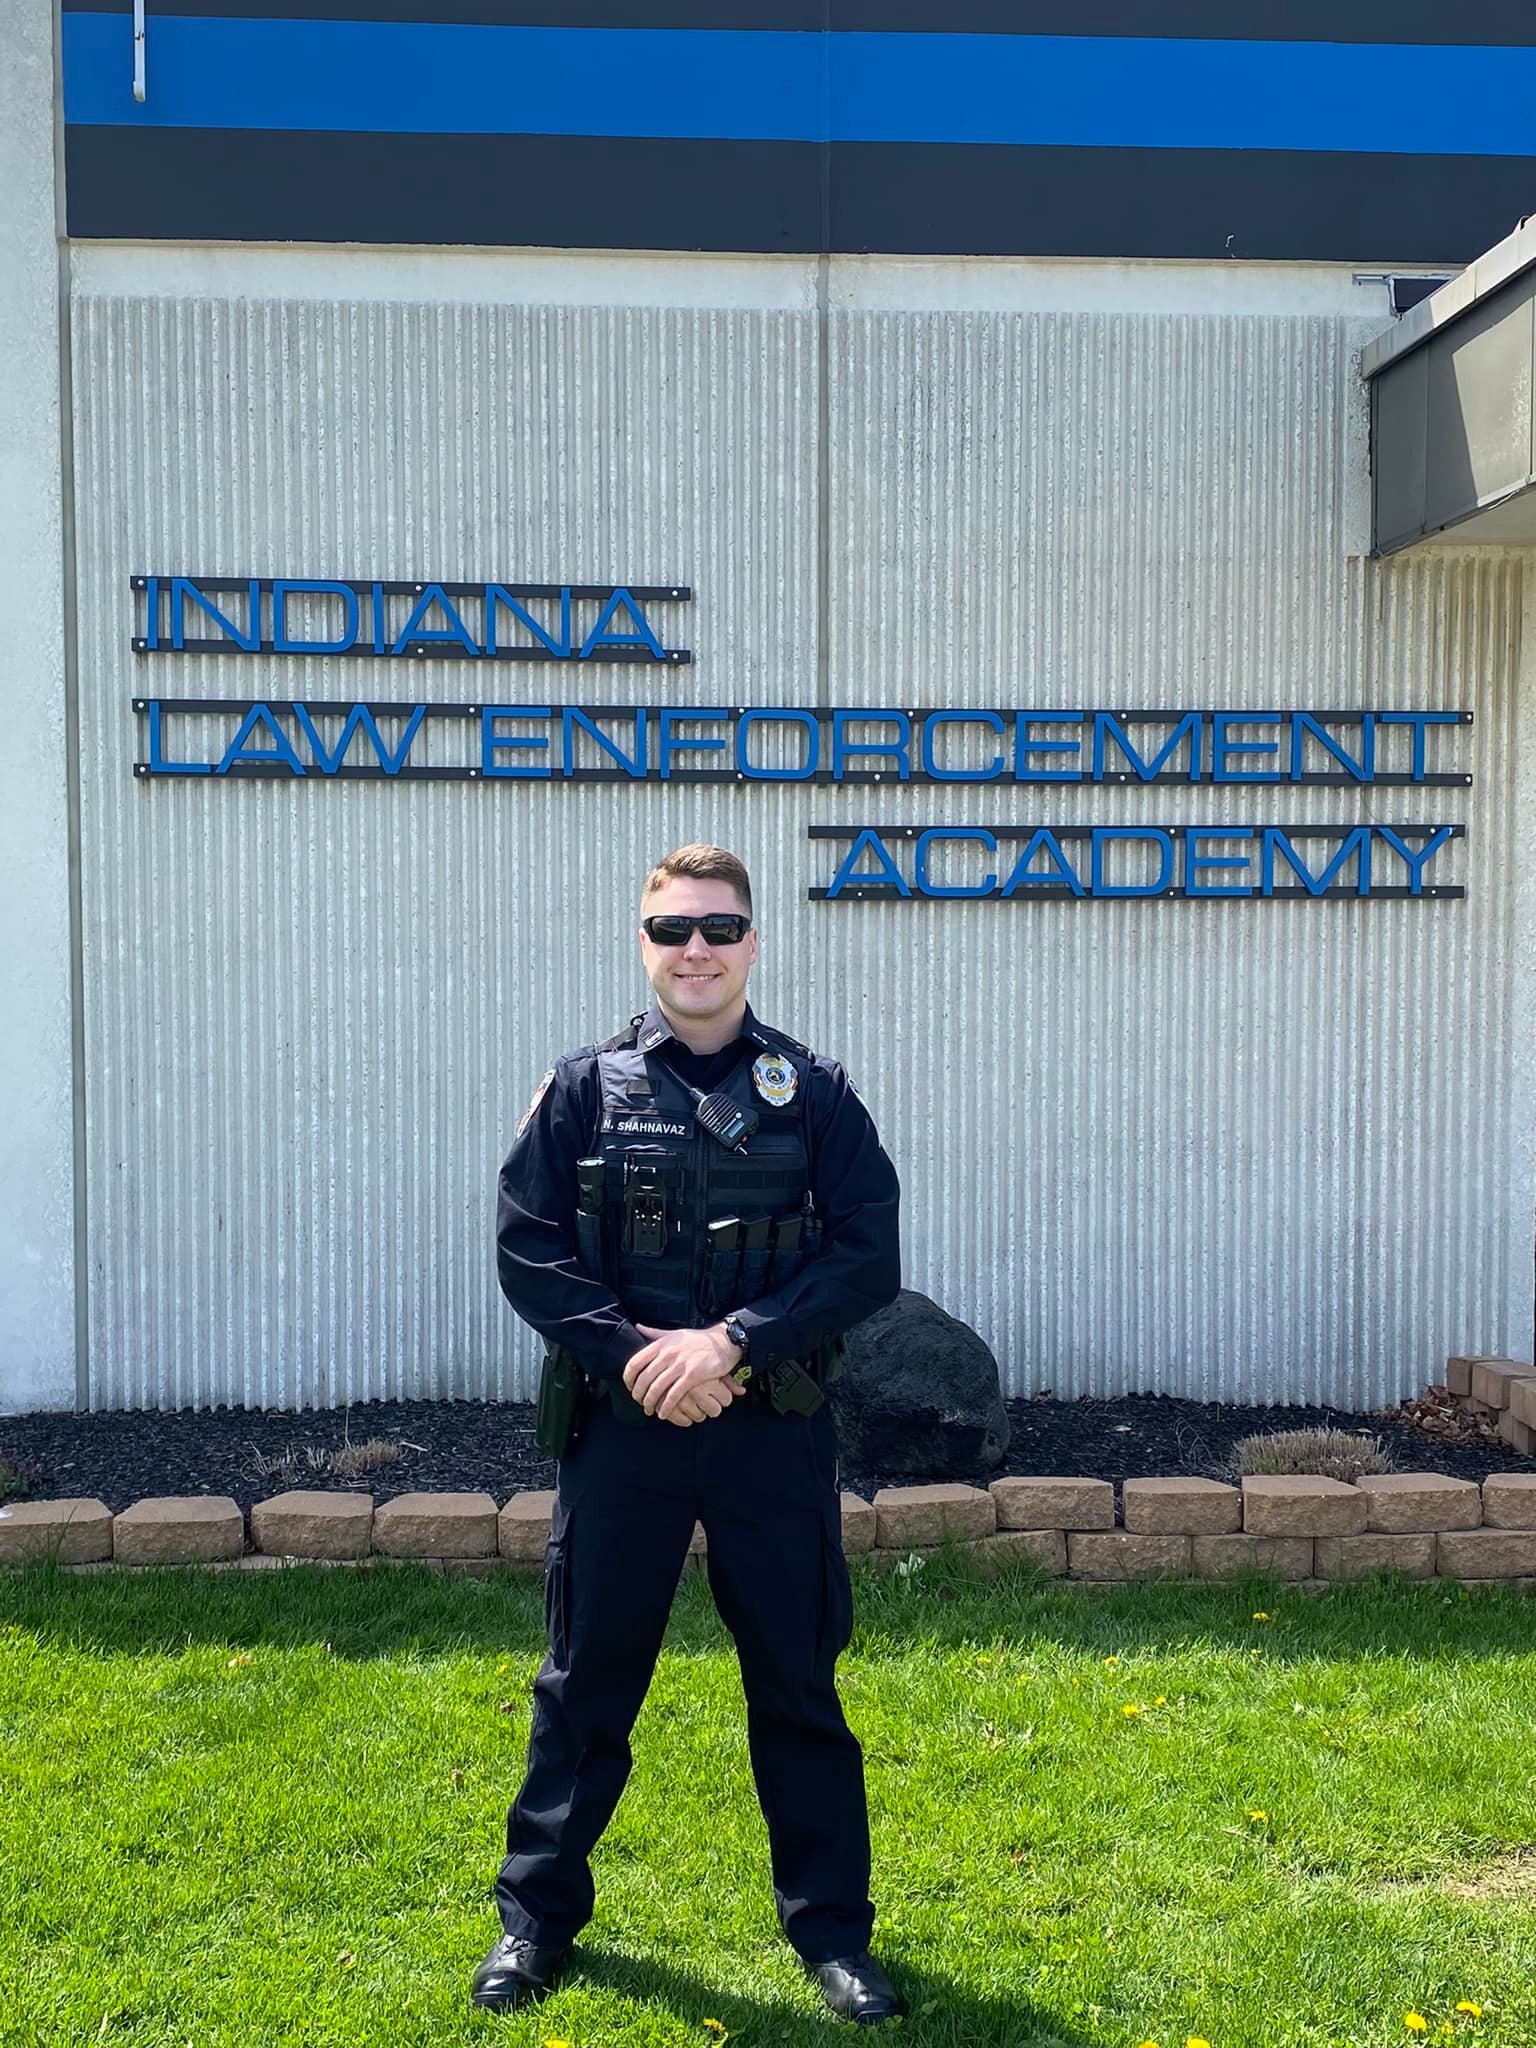 Slain Officer Noah Shahnavaz's April graduation from the Indiana Law Enforcement Academy (Photo from Elwood Police Department Facebook page)